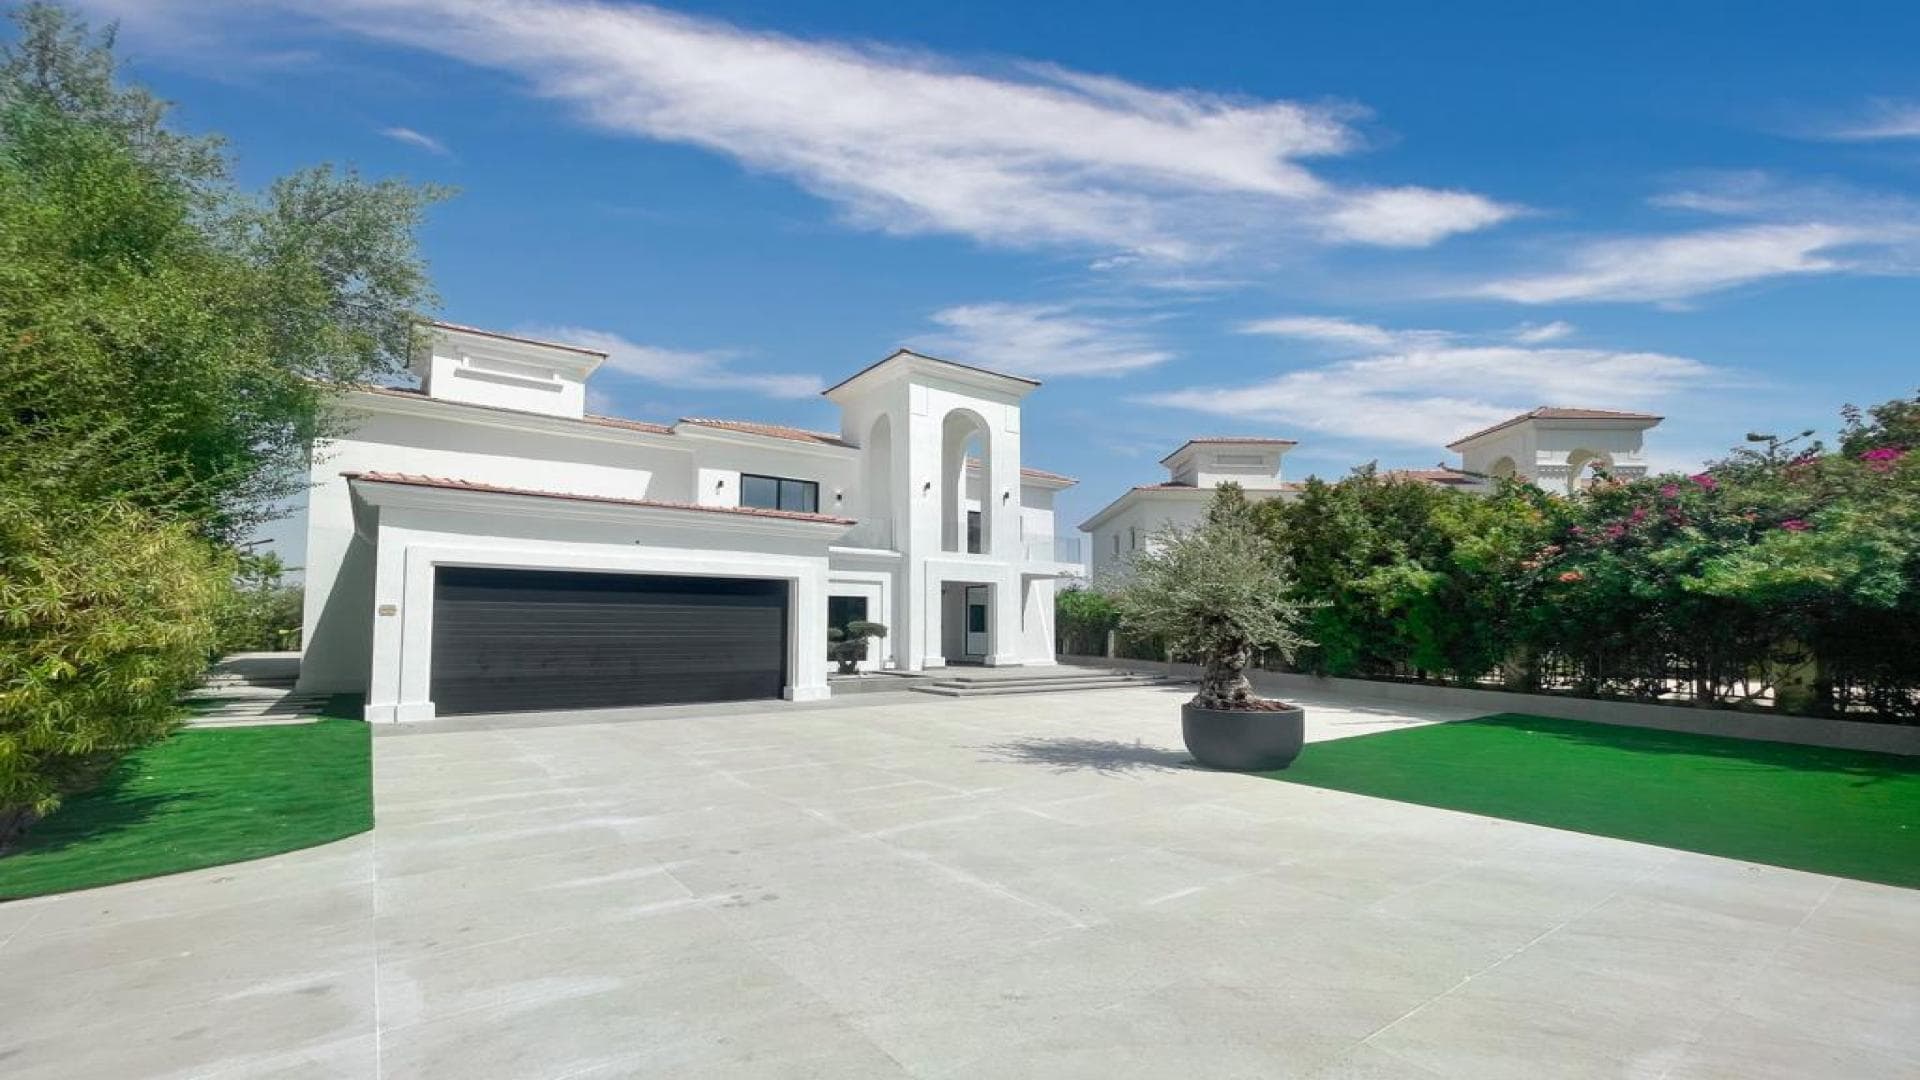 4 Bedroom Villa For Sale Bay Central East Lp36901 18fa7991aed79f00.jpeg